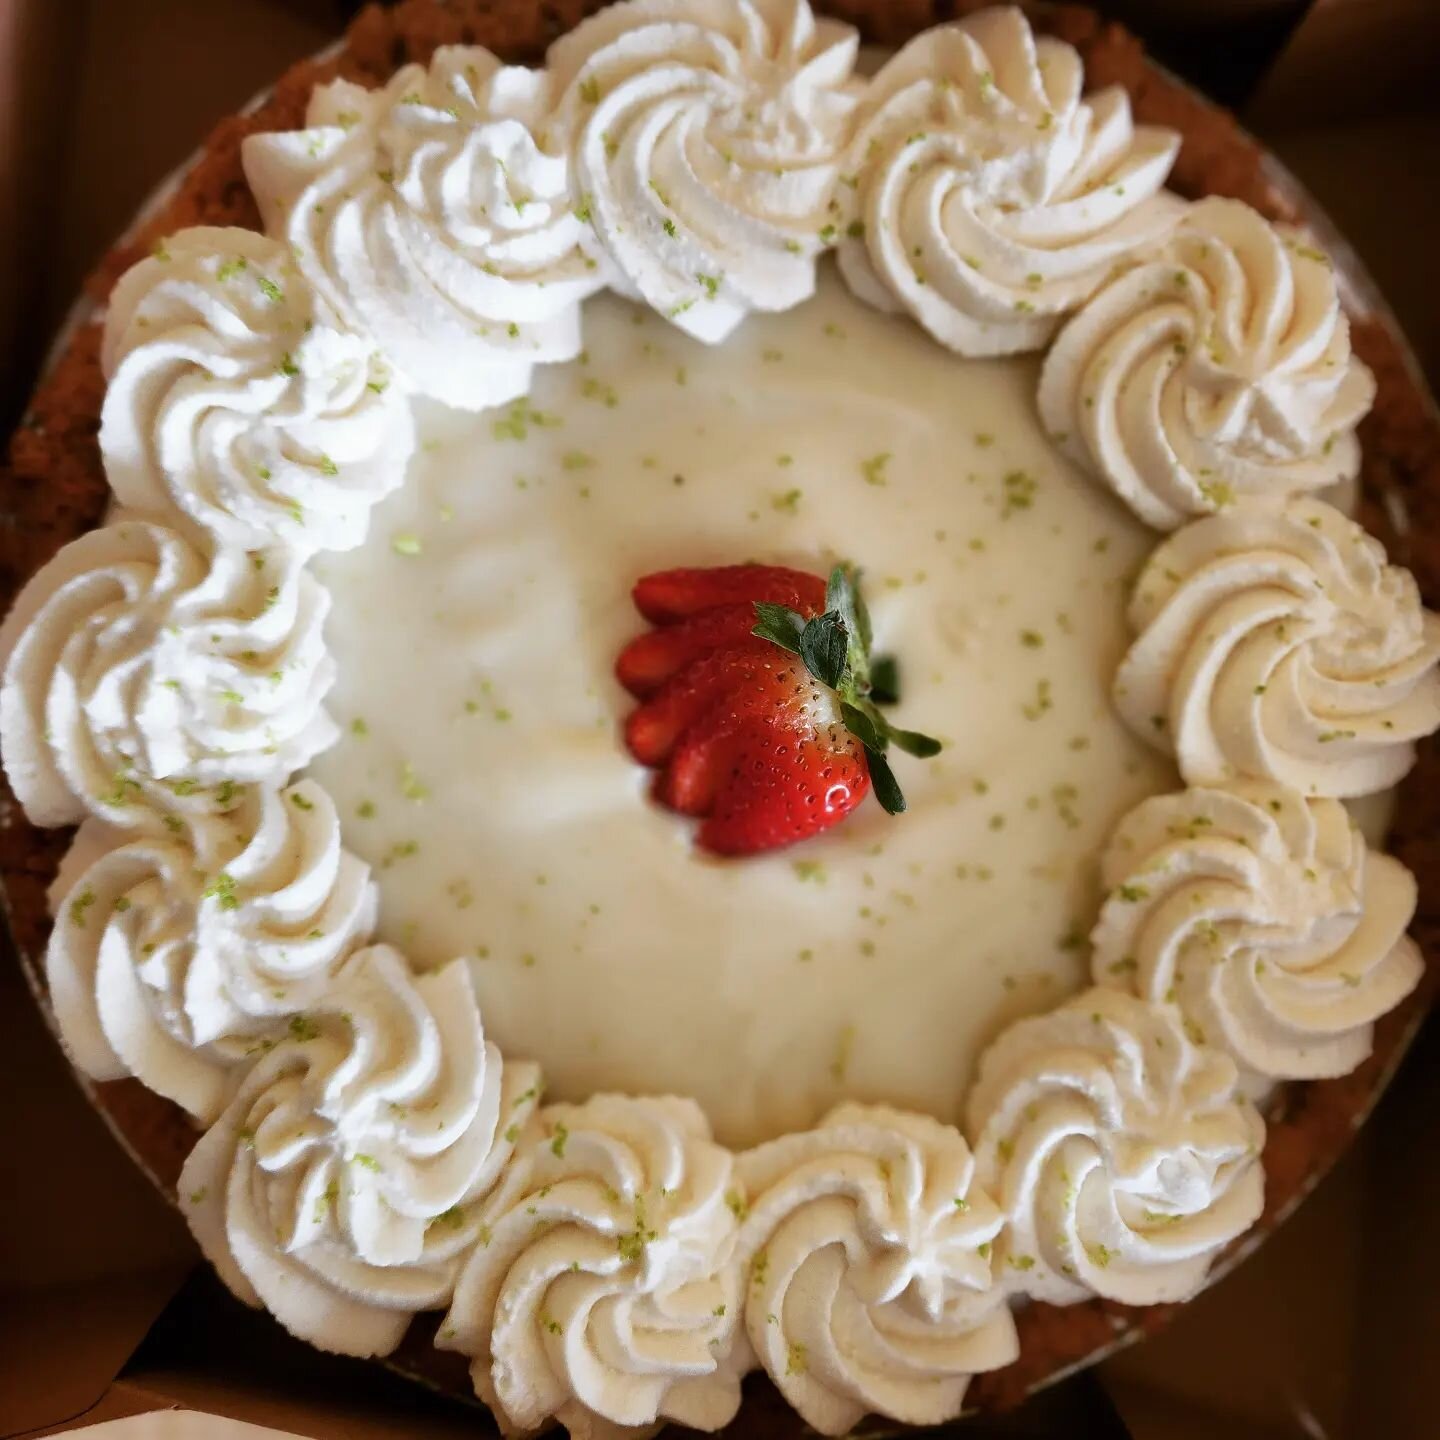 Our keylime pie decided to get a little sassy for Spring with this Strawberry variation...lets just say that my taste buds are doing the ultimate happy dance! 🍓

Tangy keylime curd and fresh muddled strawberries make this match a dessert lovers ulti